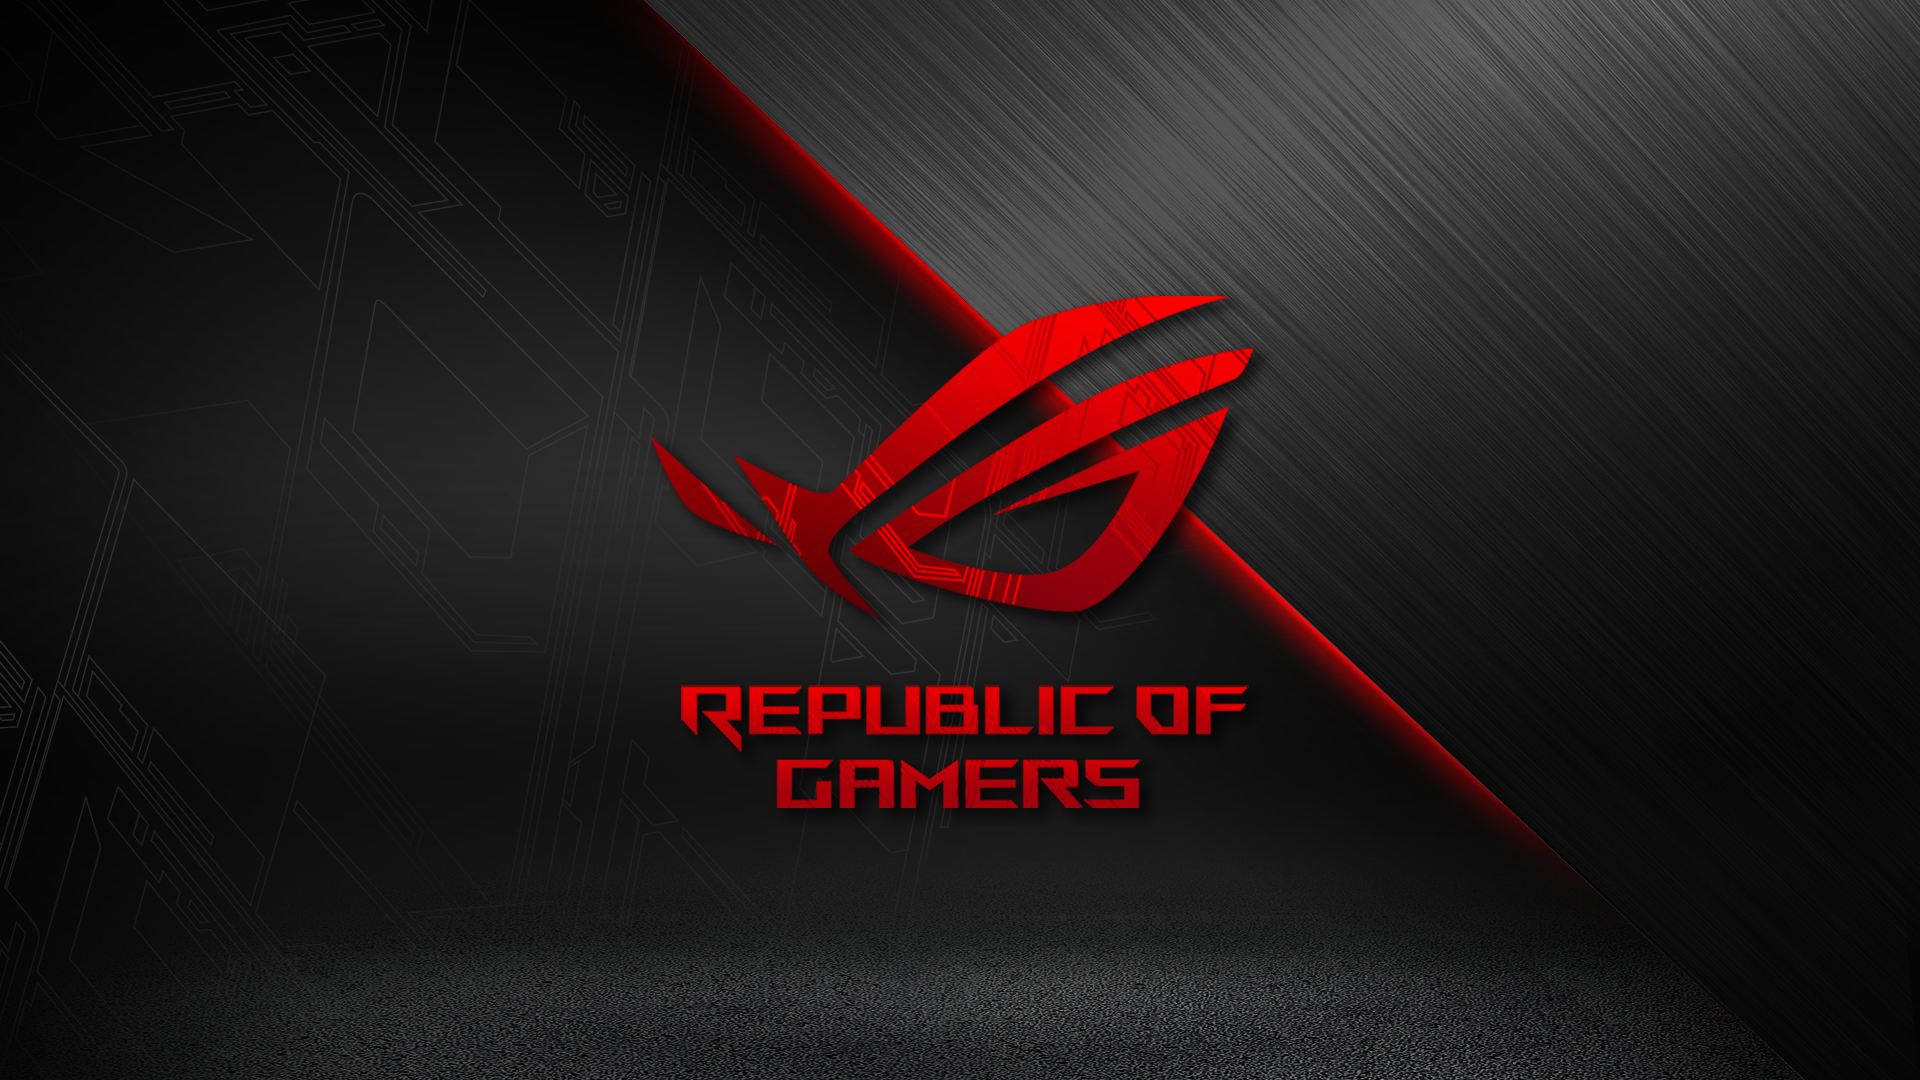 Featured image of post Full Hd Rog Wallpaper 1920X1080 1920x1080 hd asus rog backgrounds amazing images cool 1080p windows wallpapers widescreen high quality dual monitors colourful 1920 1080 wallpaper here s a list of what screen resolutions we support along with popular devices that support them